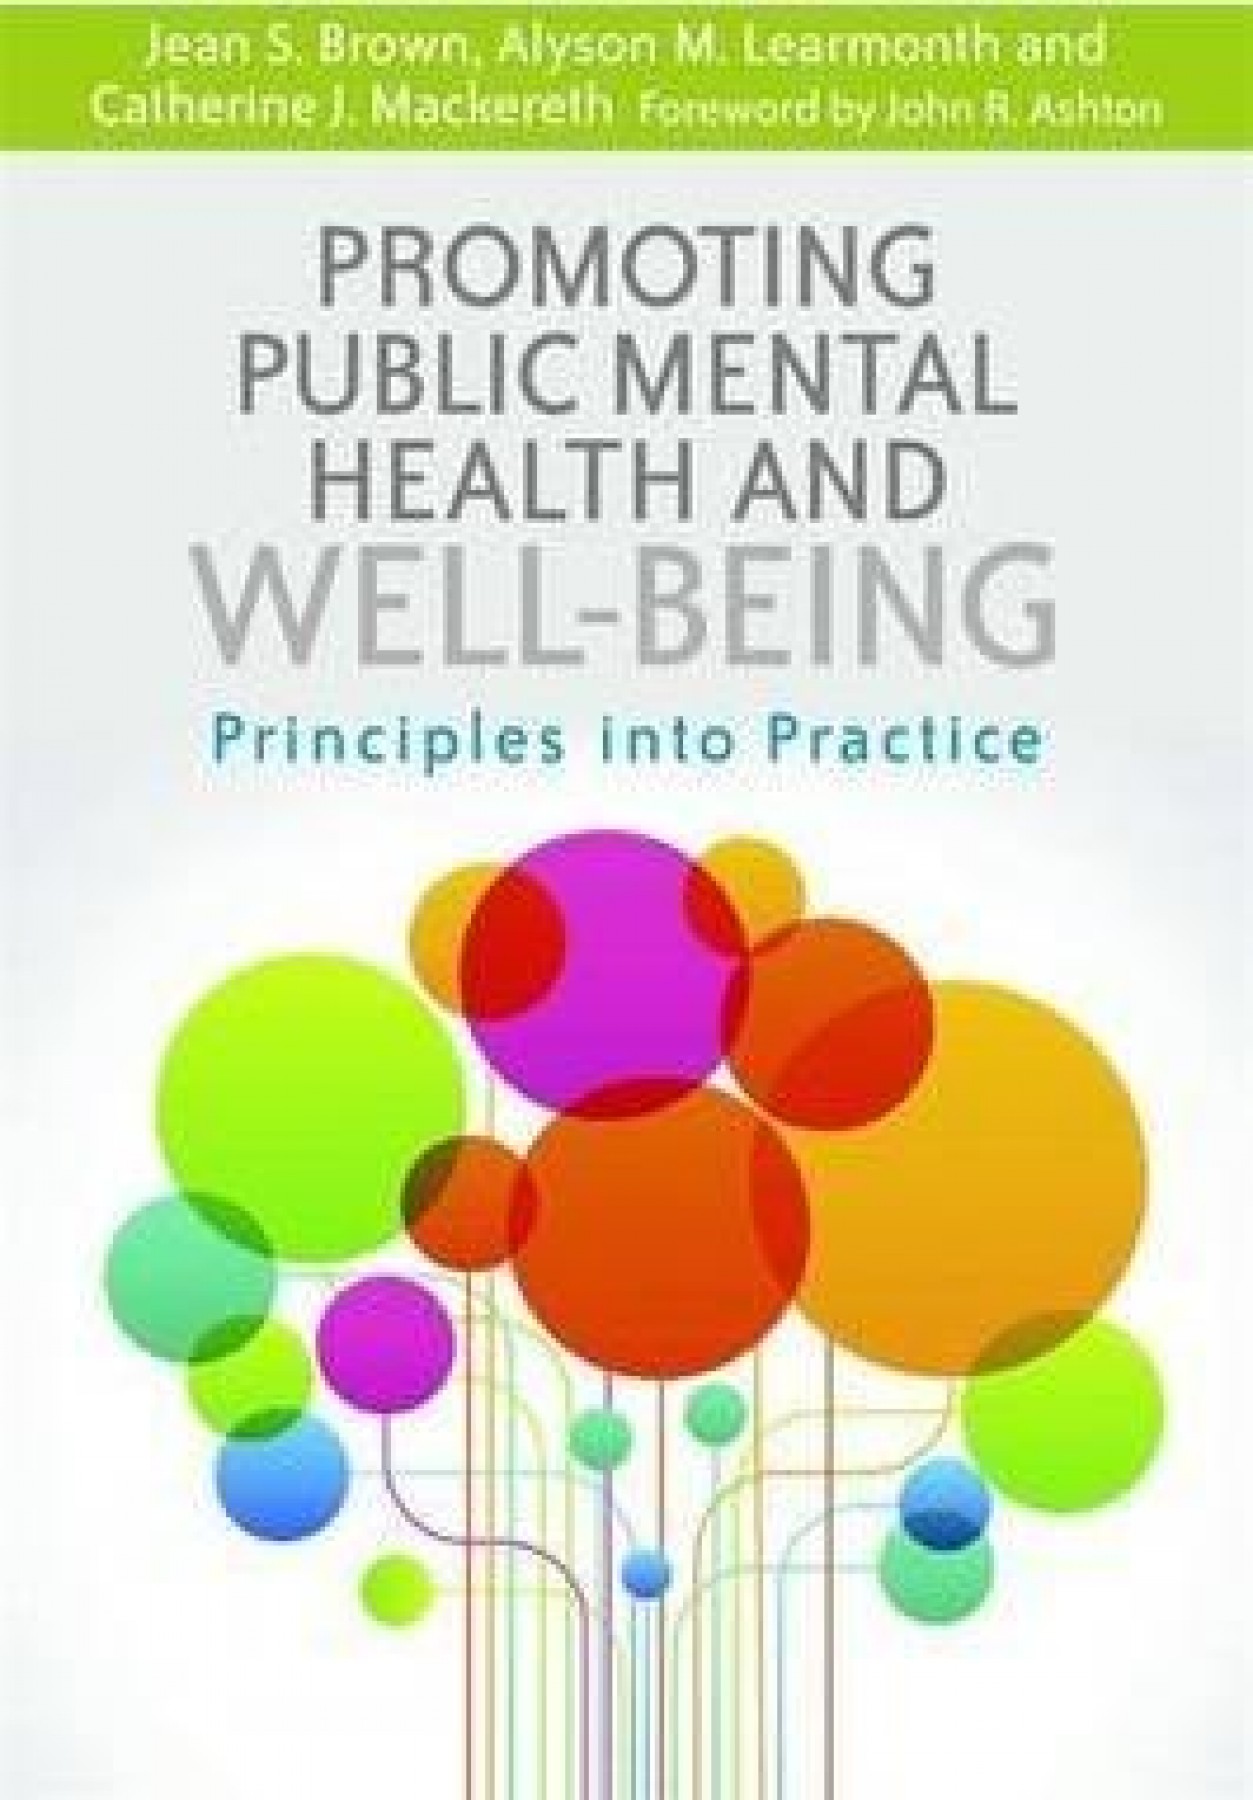 Promoting Public Mental Health and Wellbeing: Principles into Practice